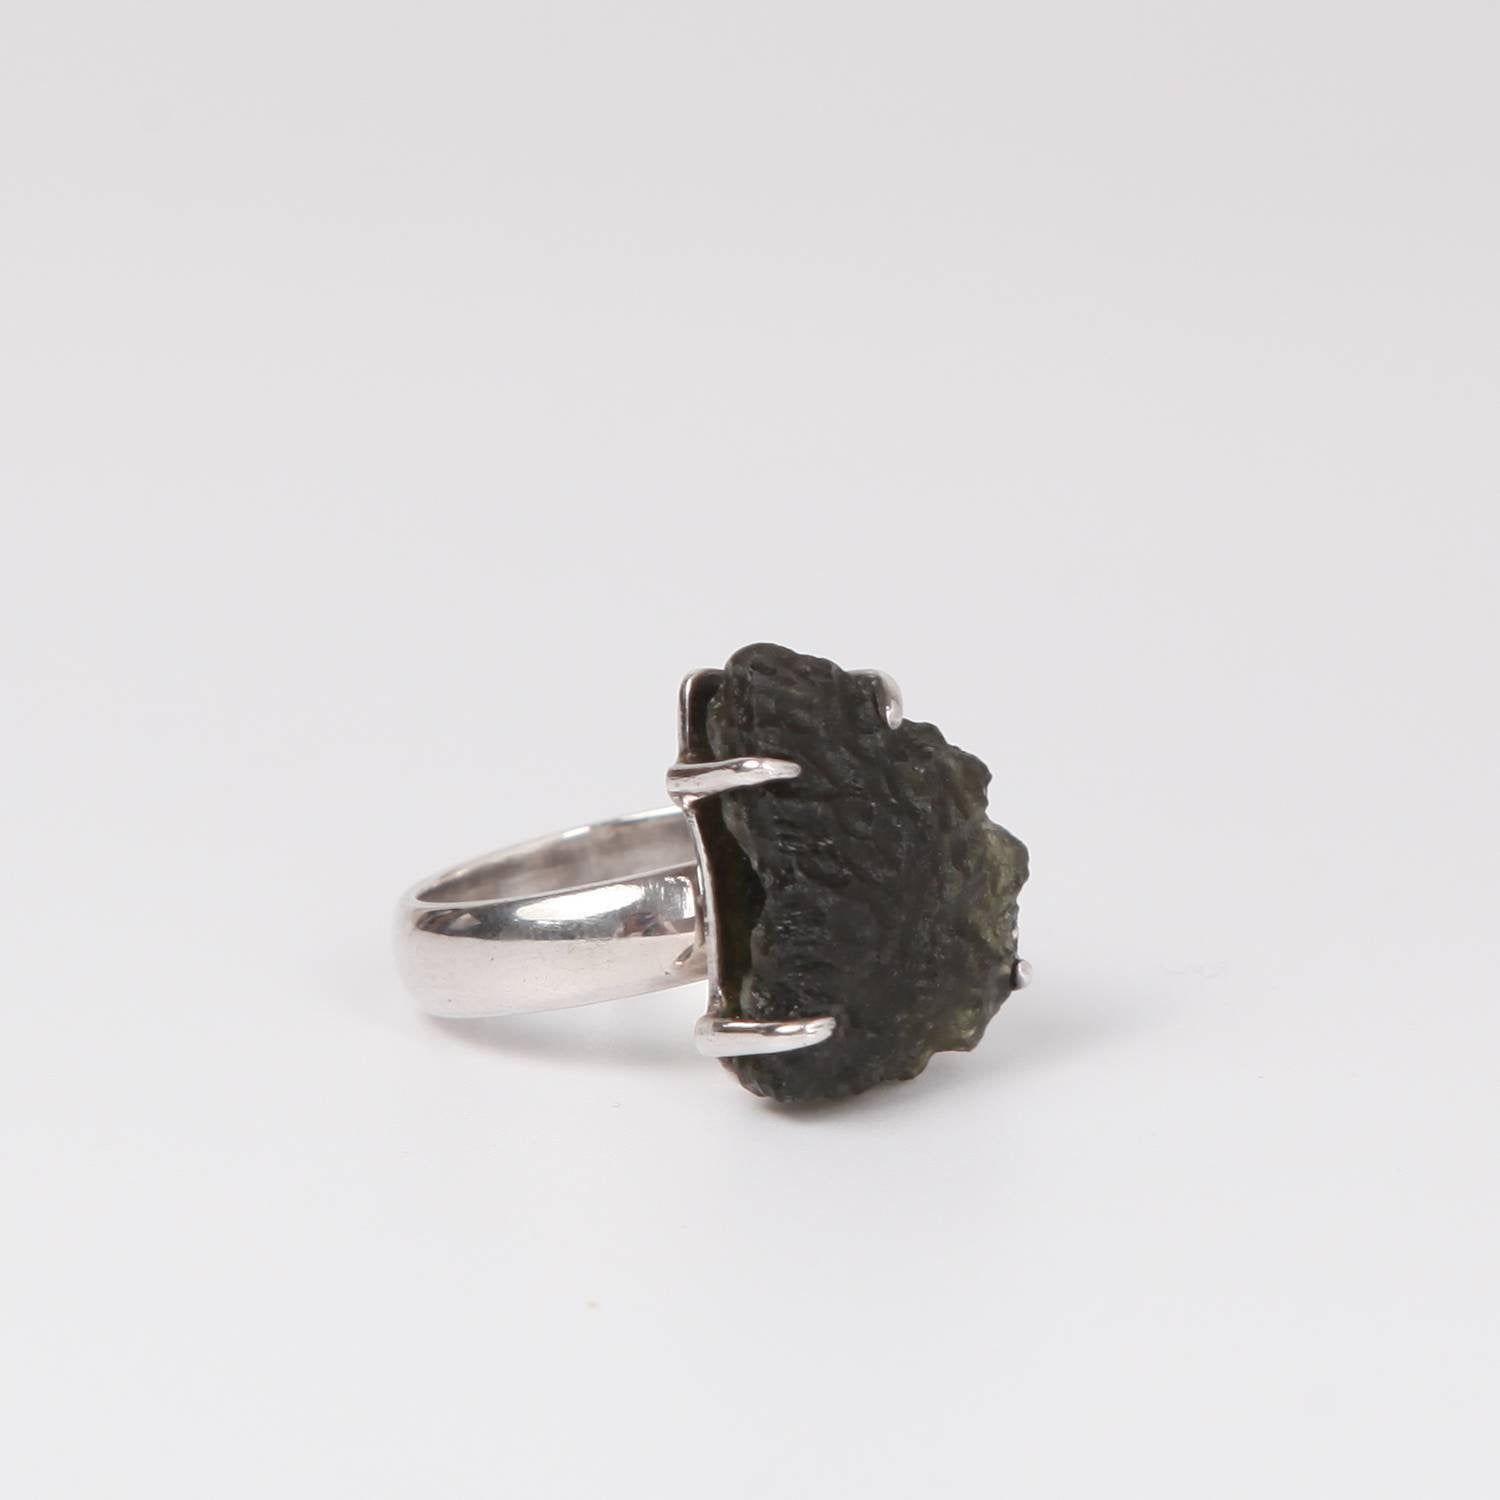 Rough Moldavite ( meteorite) Ring with Sterling Silver